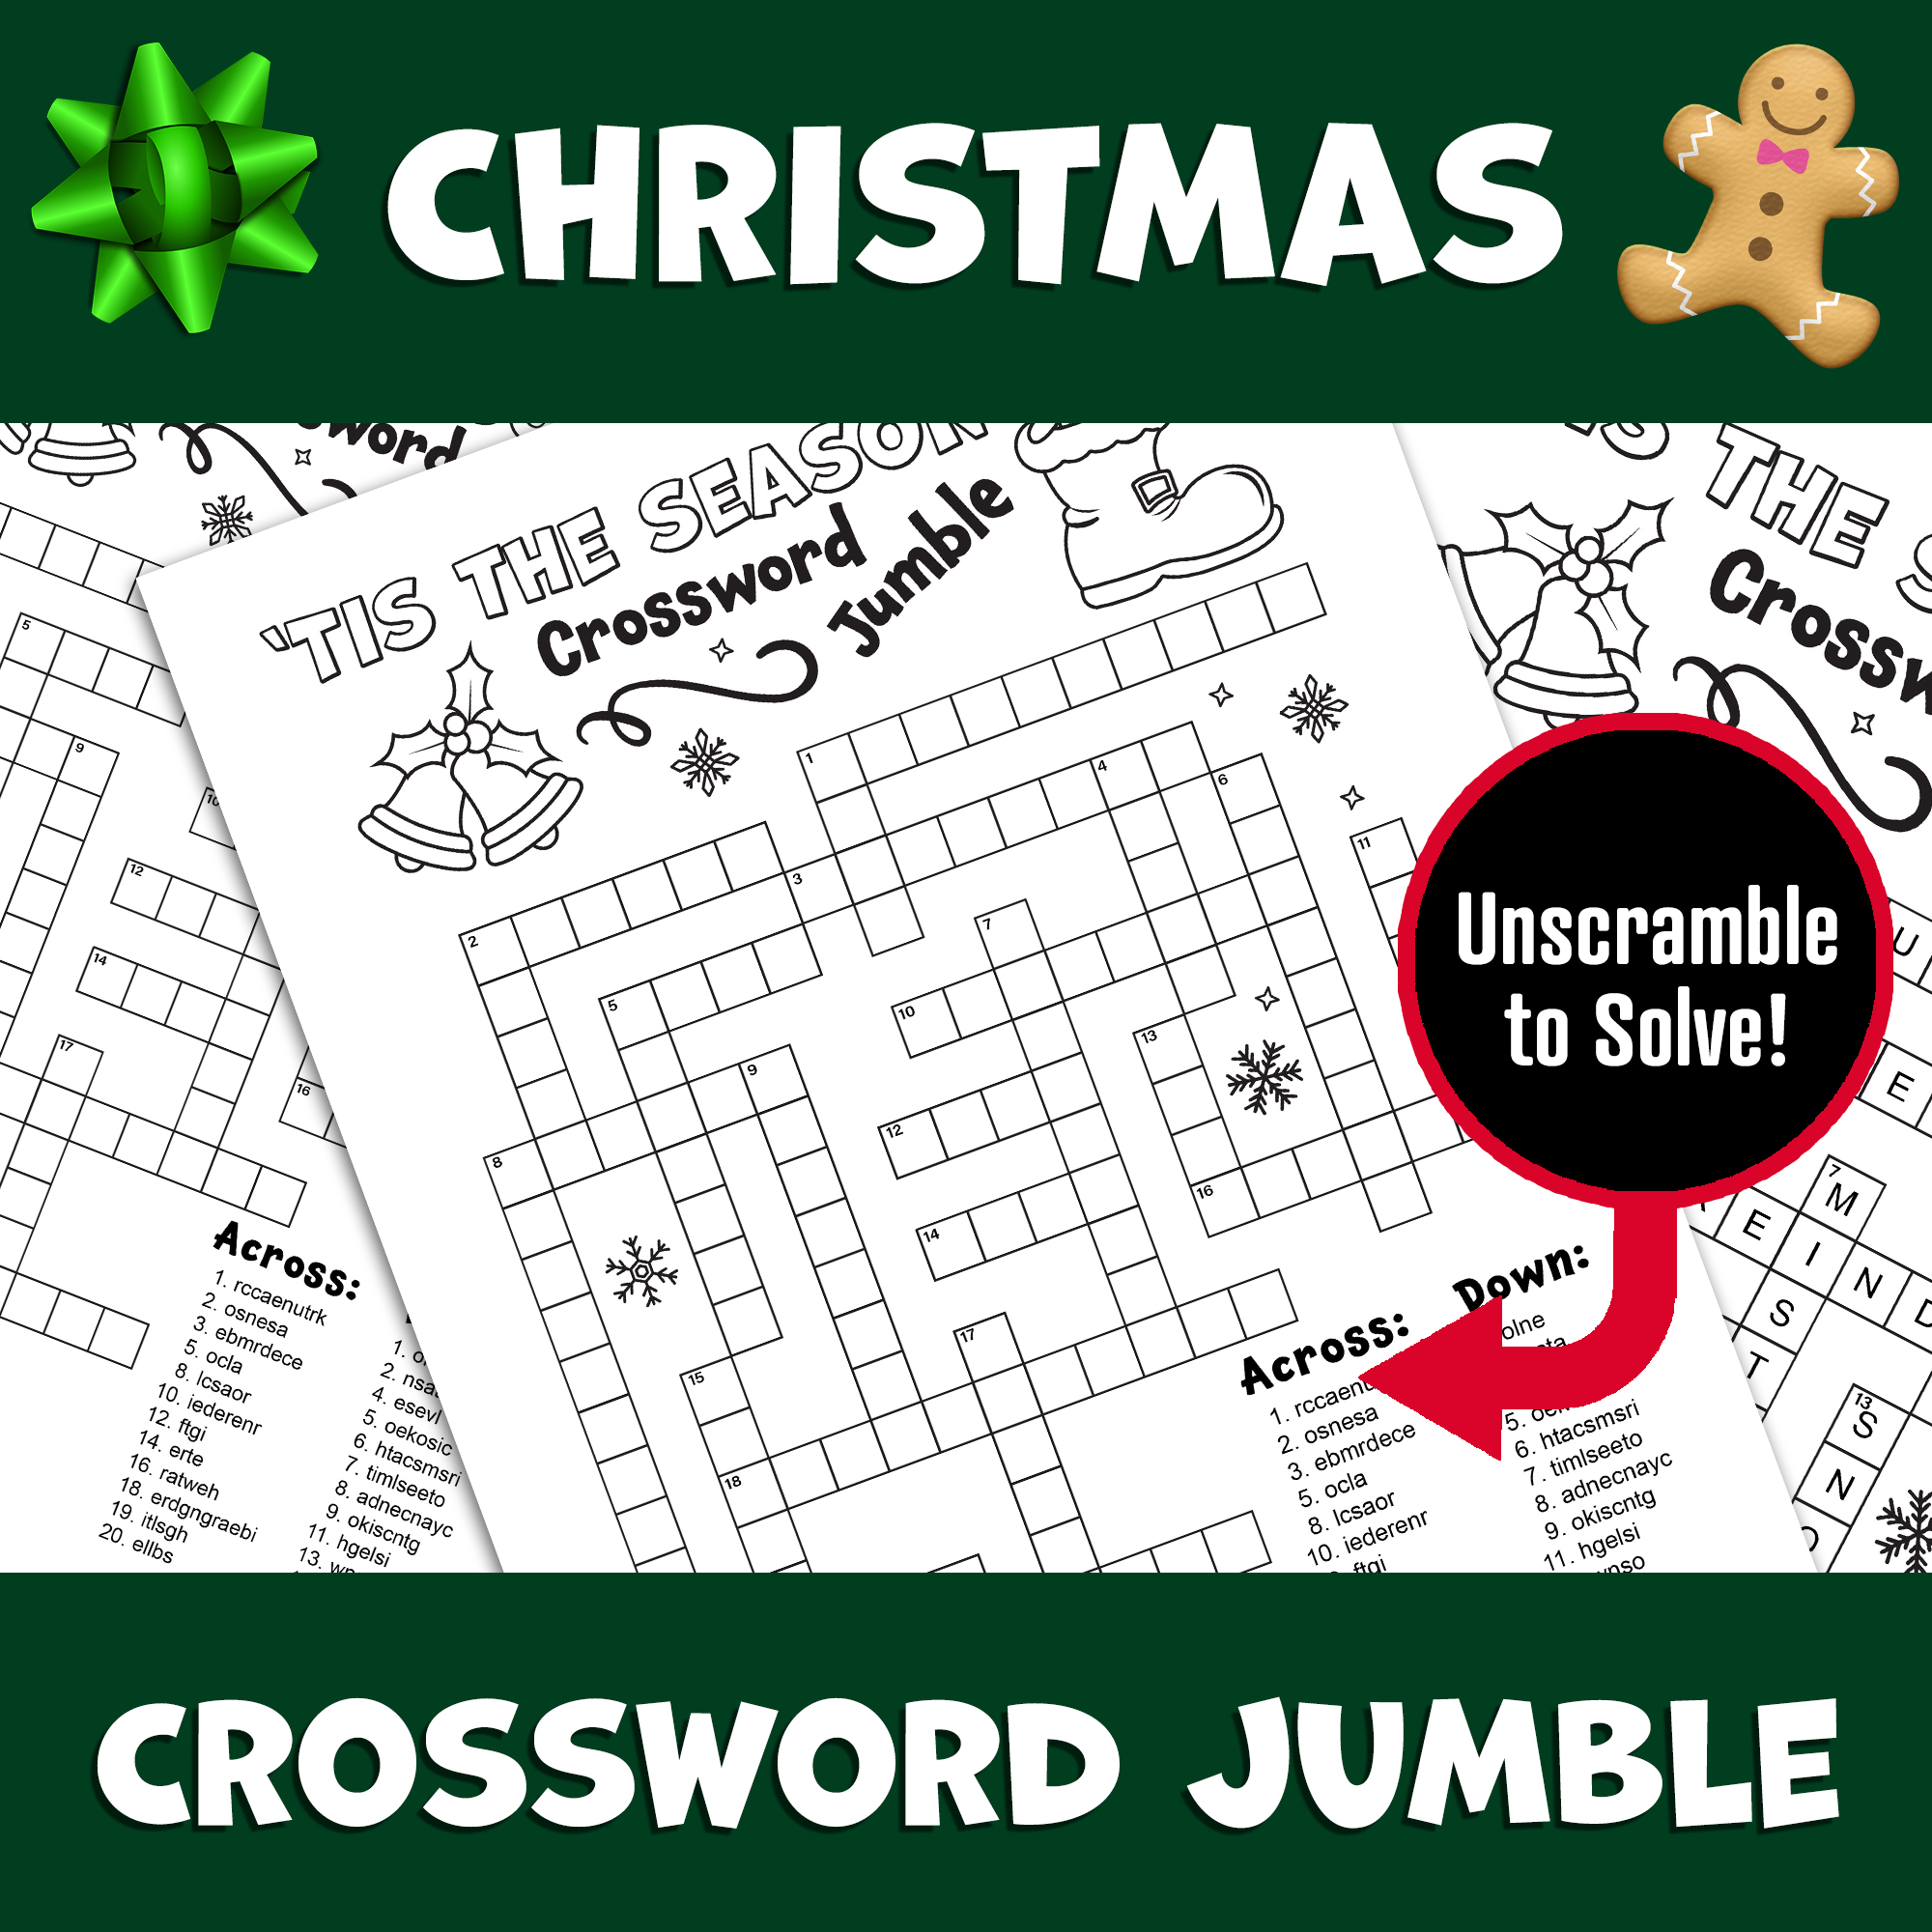 Christmas crossword puzzle word scramble winter word game word unscramble made by teachers